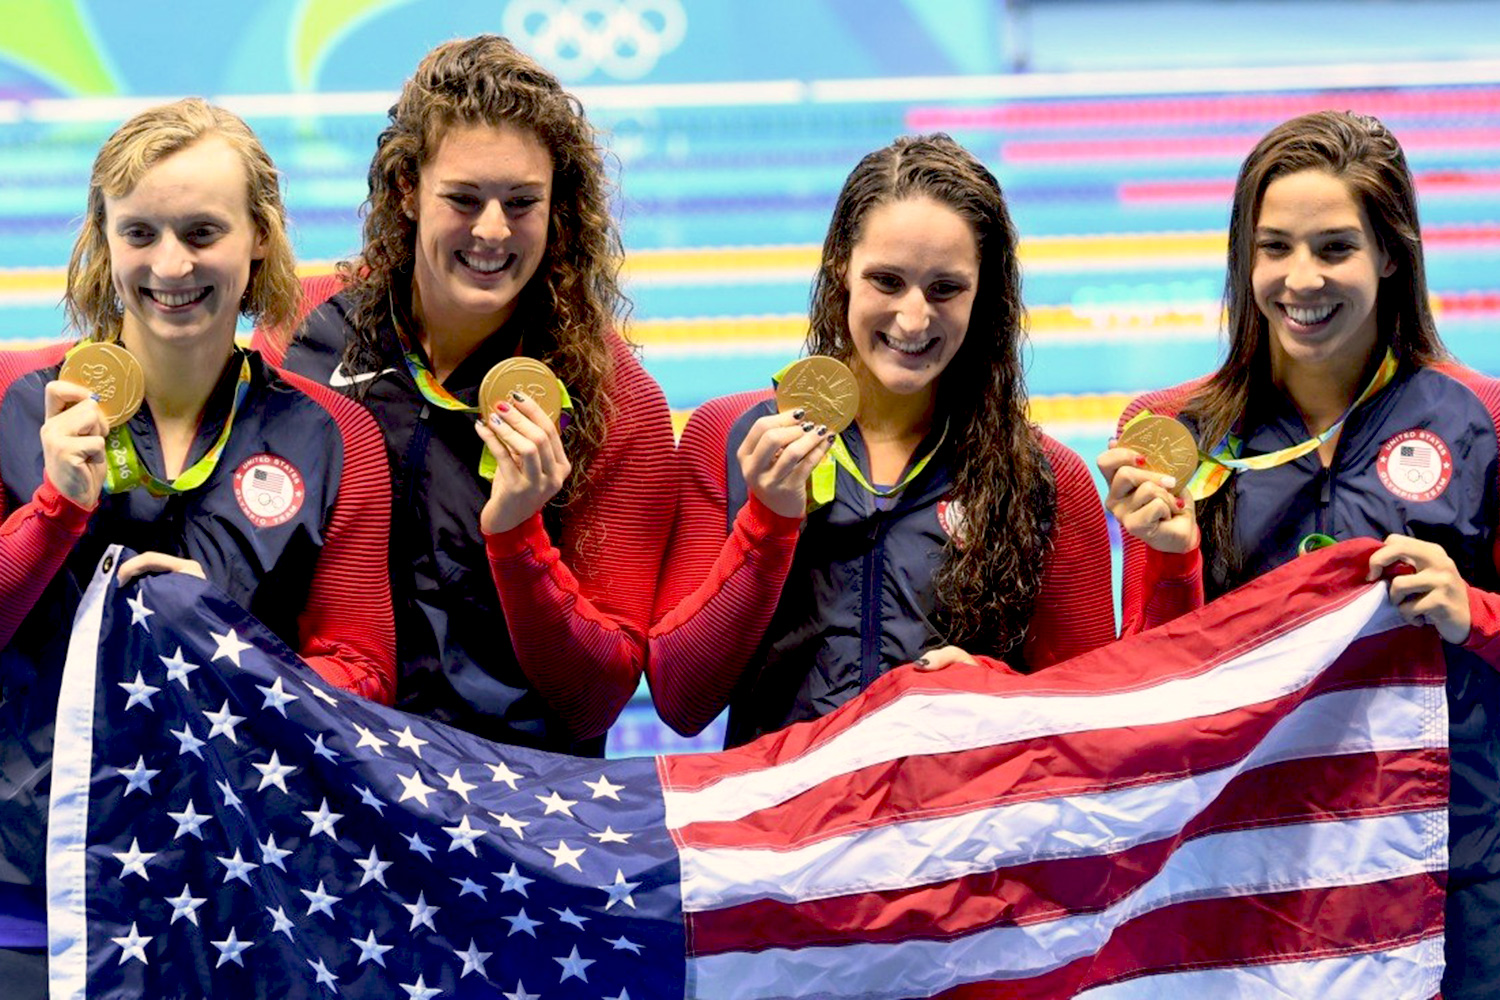 UVA swimmer Leah Smith, second from right, celebrates her gold medal with U.S. relay teammates, left to right, Katie Ledecky, Allison Schmitt and Maya DiRado.